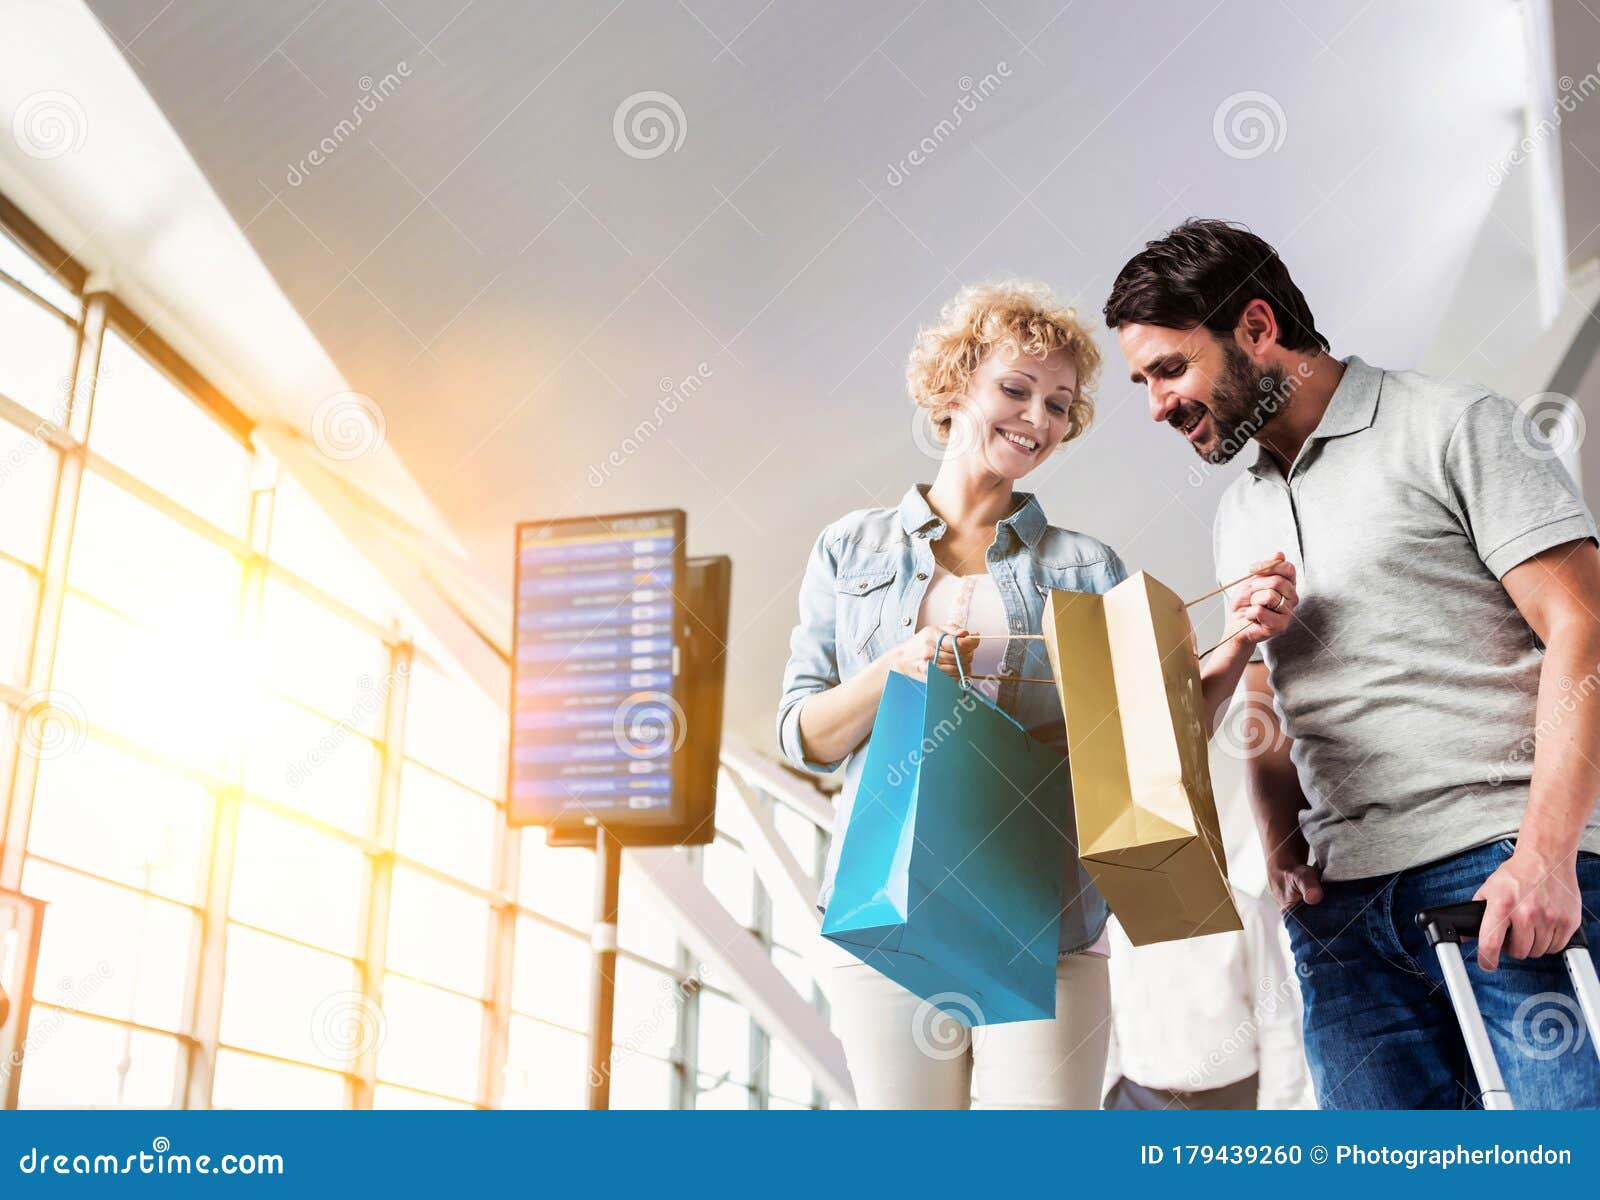 portrait of mature woman showing present she bought in duty free with her husband at airport